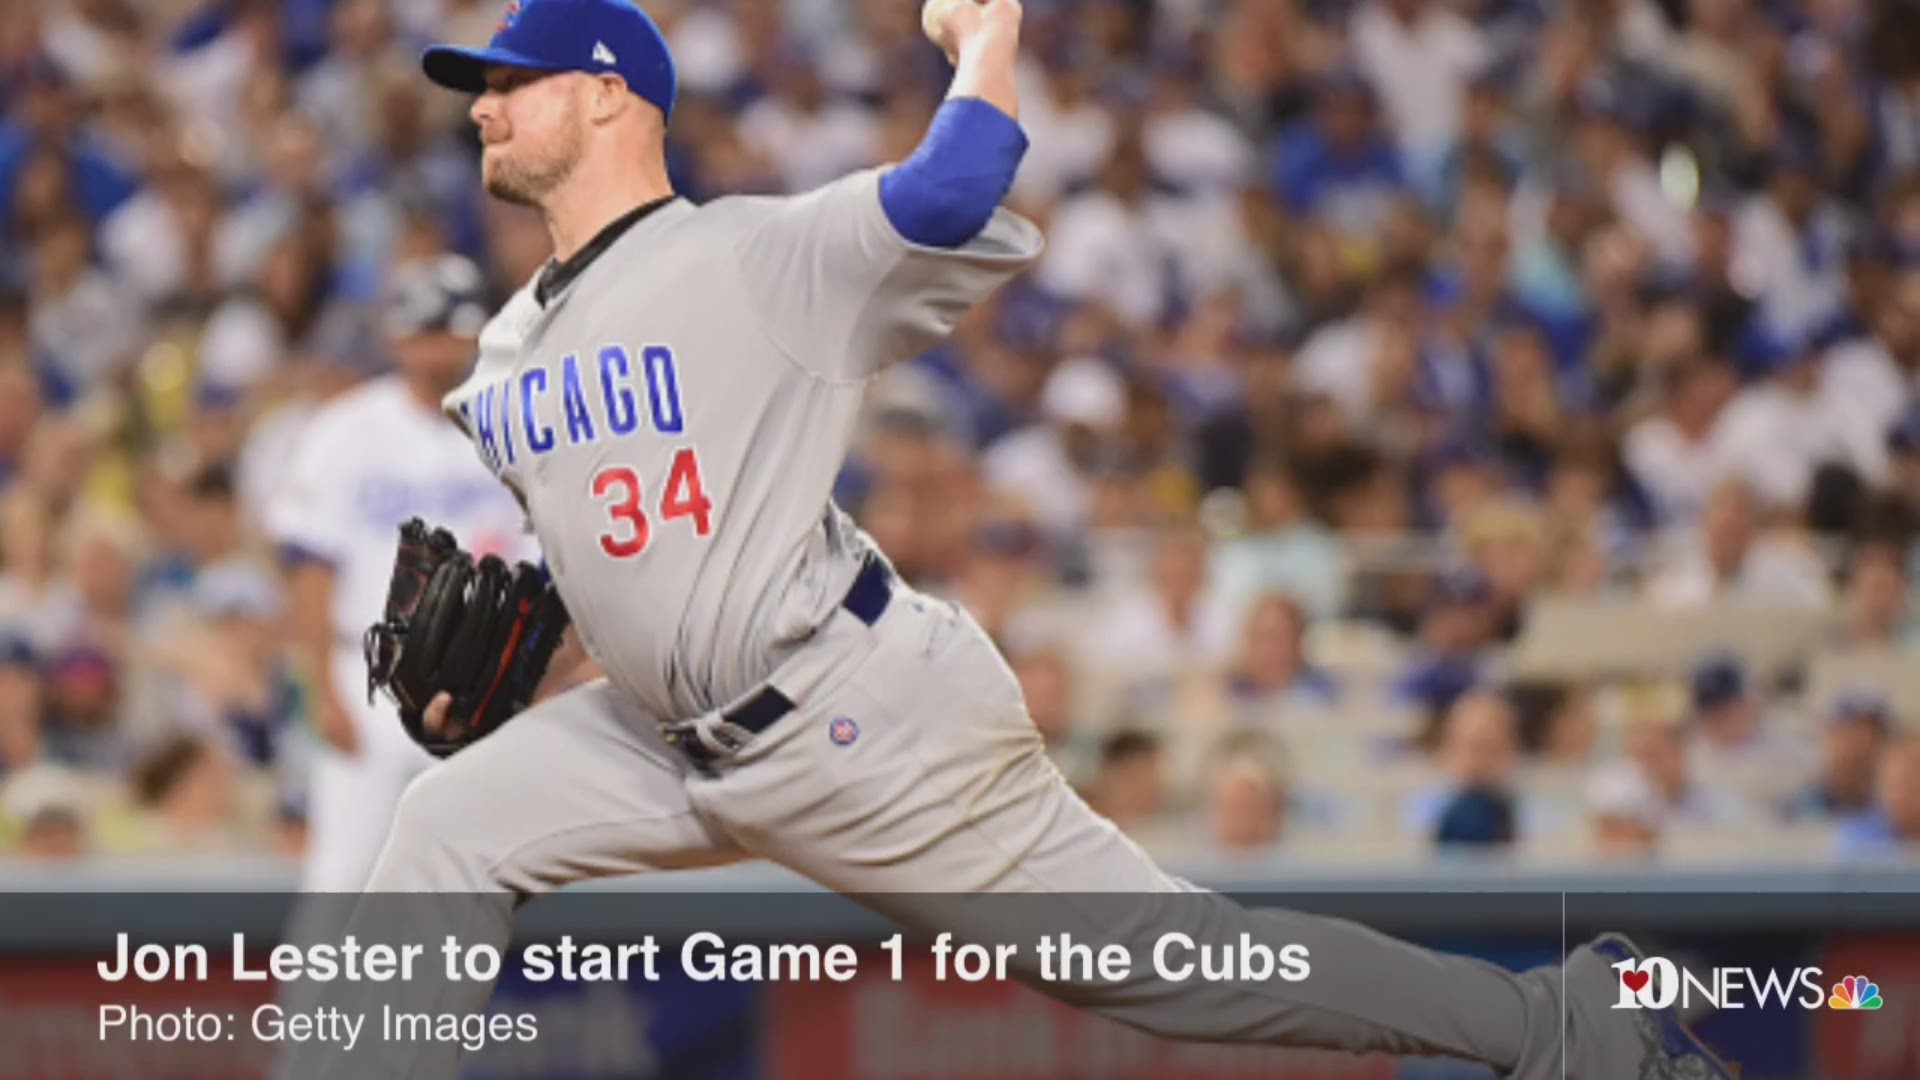 The Cleveland Indians host the Chicago Cubs in Game 1 of the 2016 World Series.